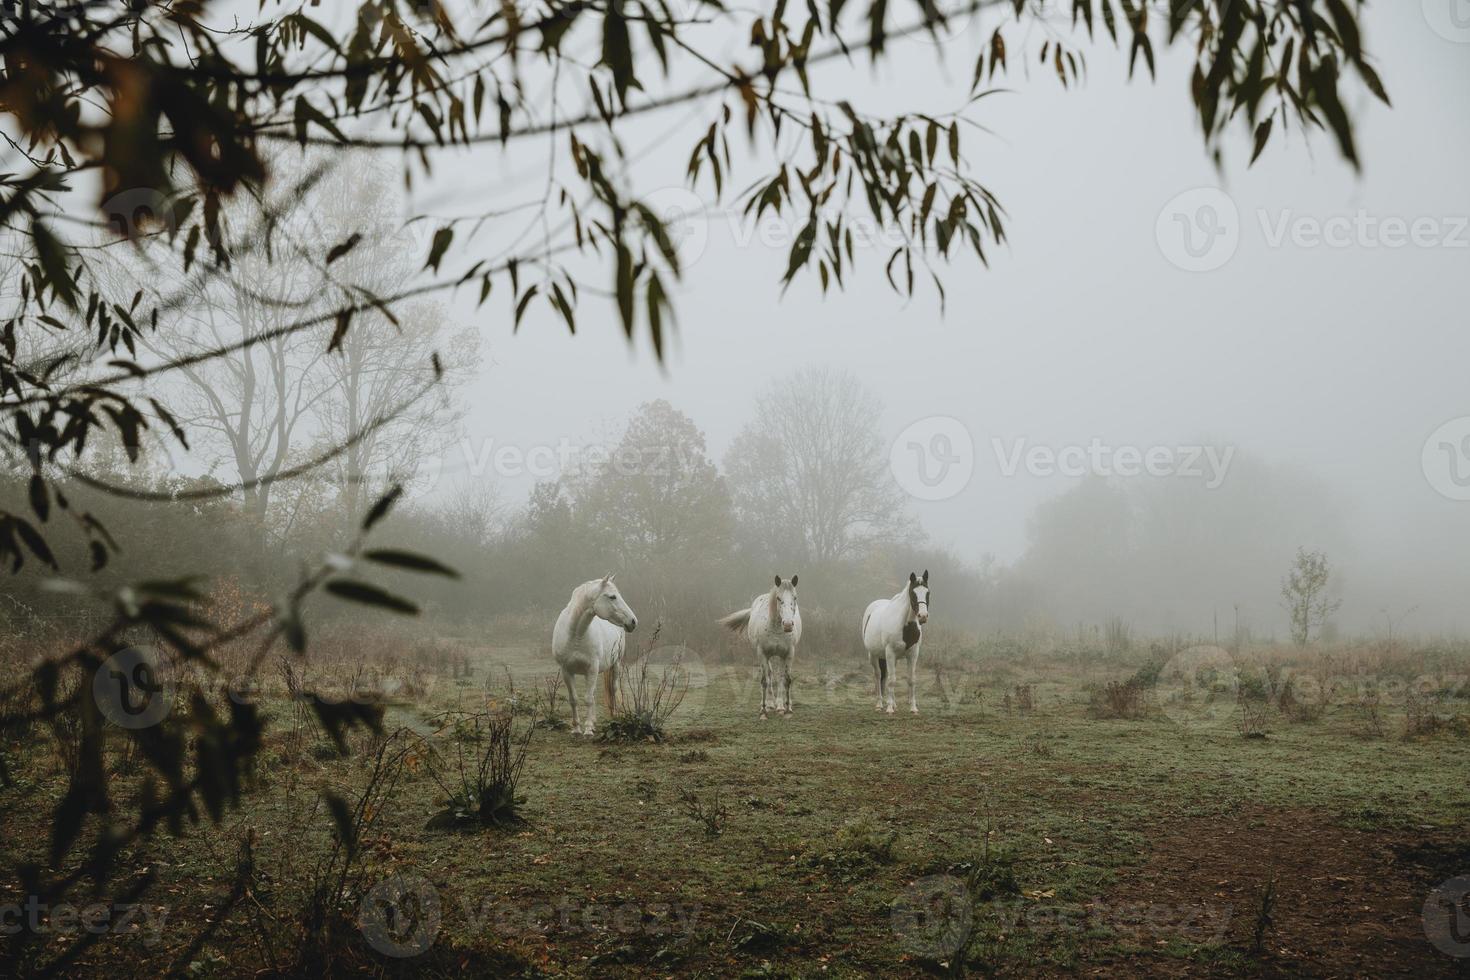 The Herd of three white Horses standind on the meadow during autumn foggy morning with twig of the tree in foreground with nordic feeling photo